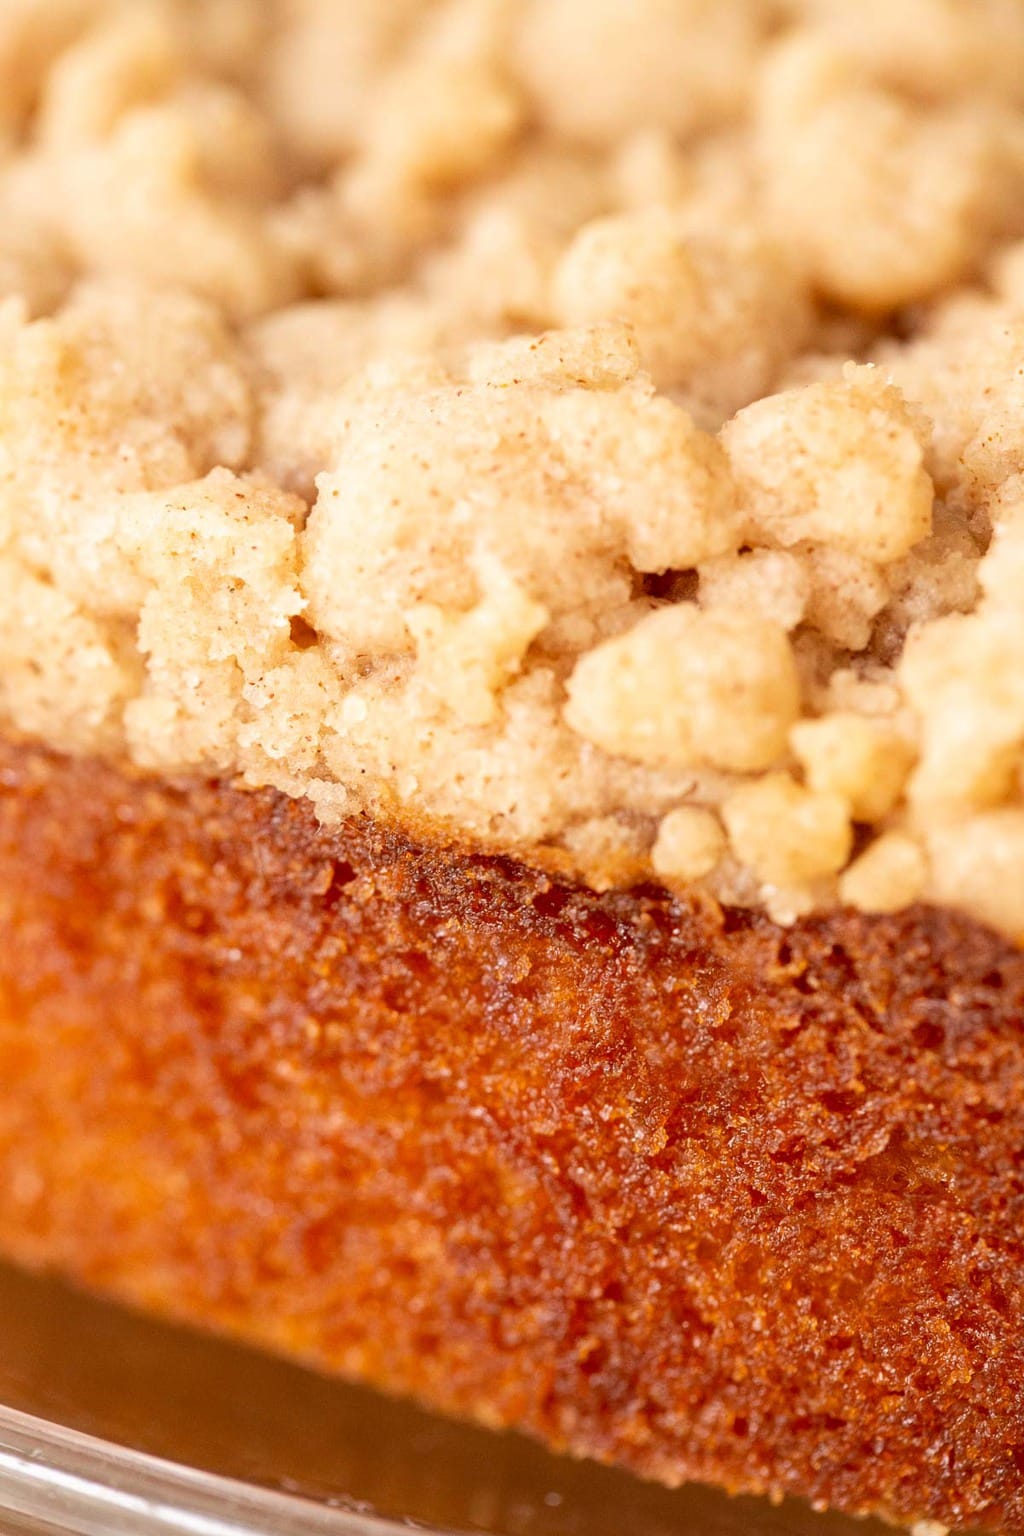 Vertical extreme closeup photo of the side and top crumble of an Easy Overnight Coffee Cake.